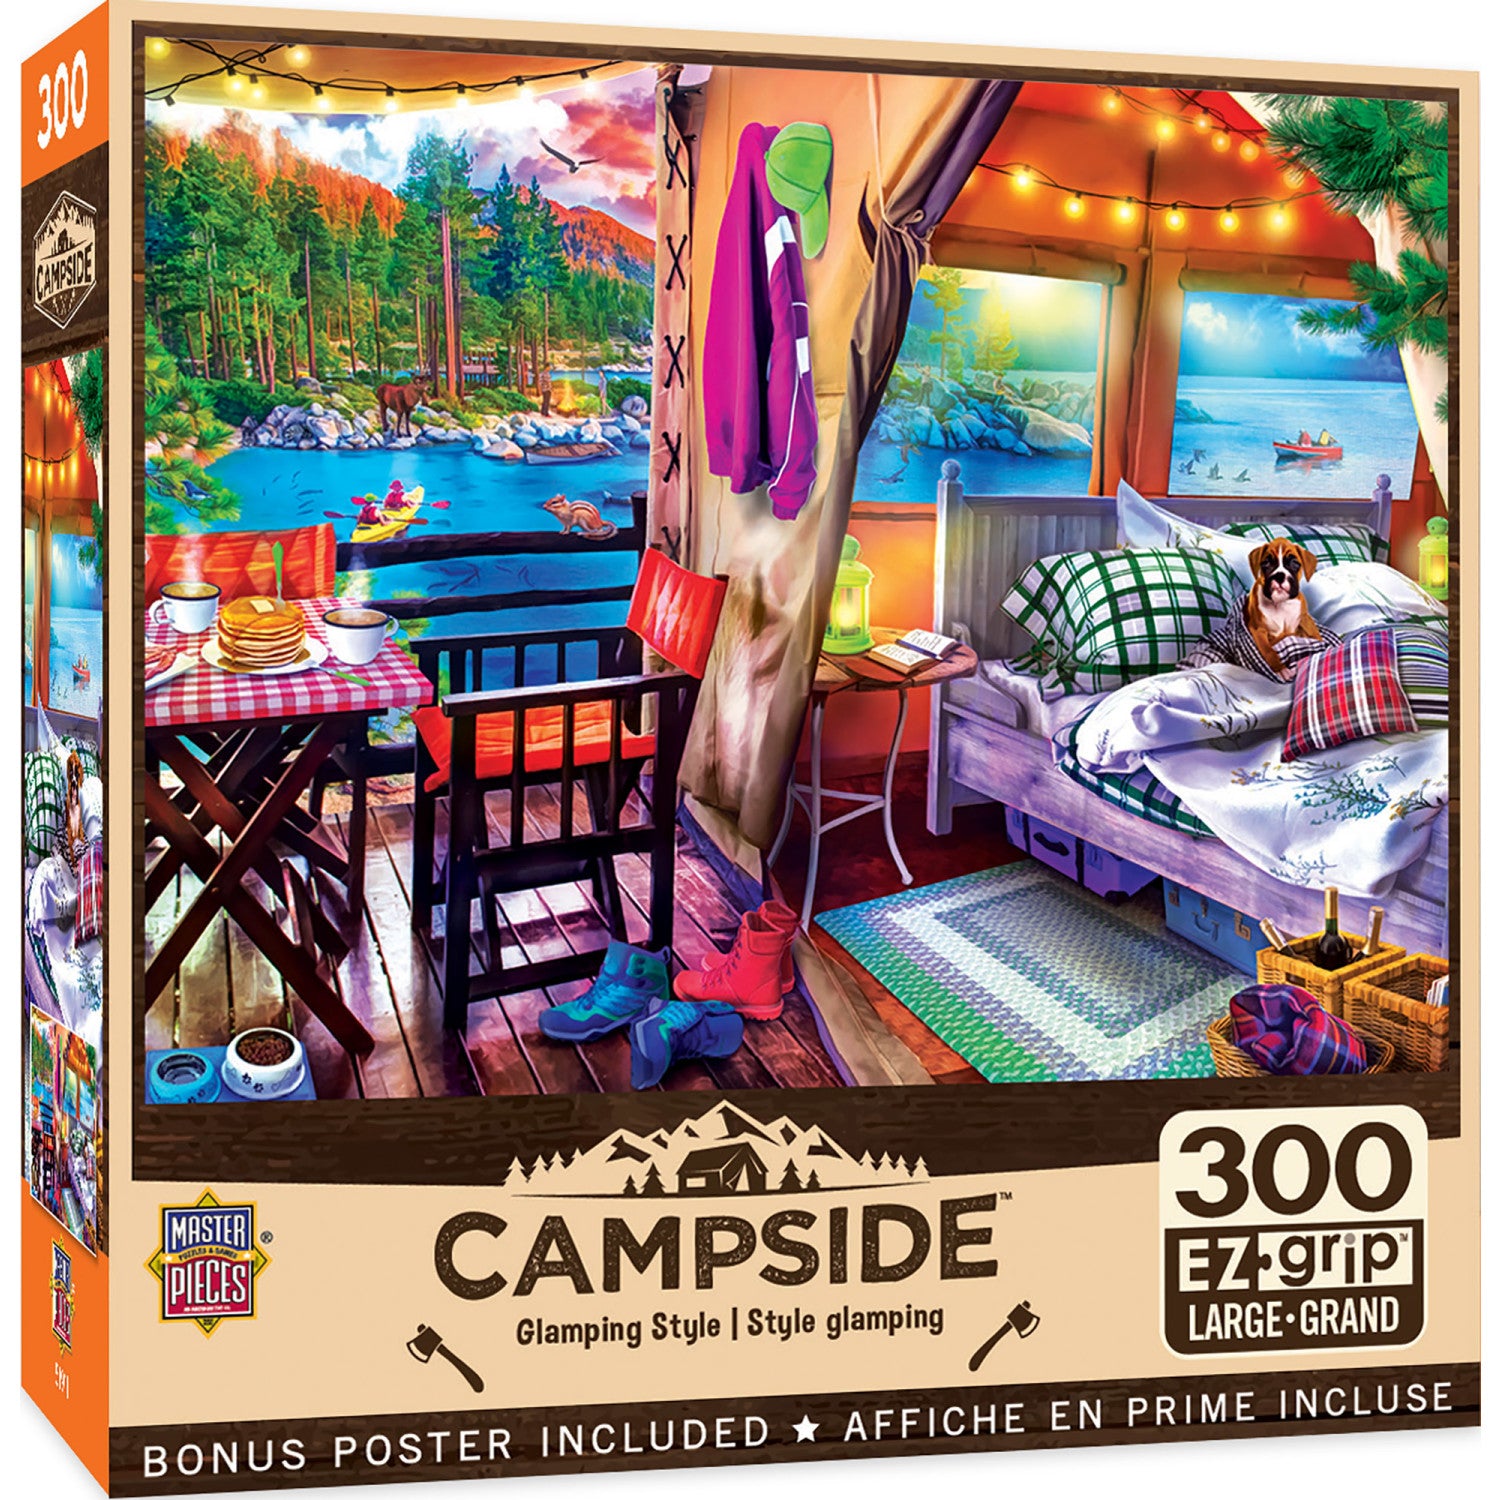 Campside - Glamping Style 300 Piece EZ Grip Jigsaw Puzzle